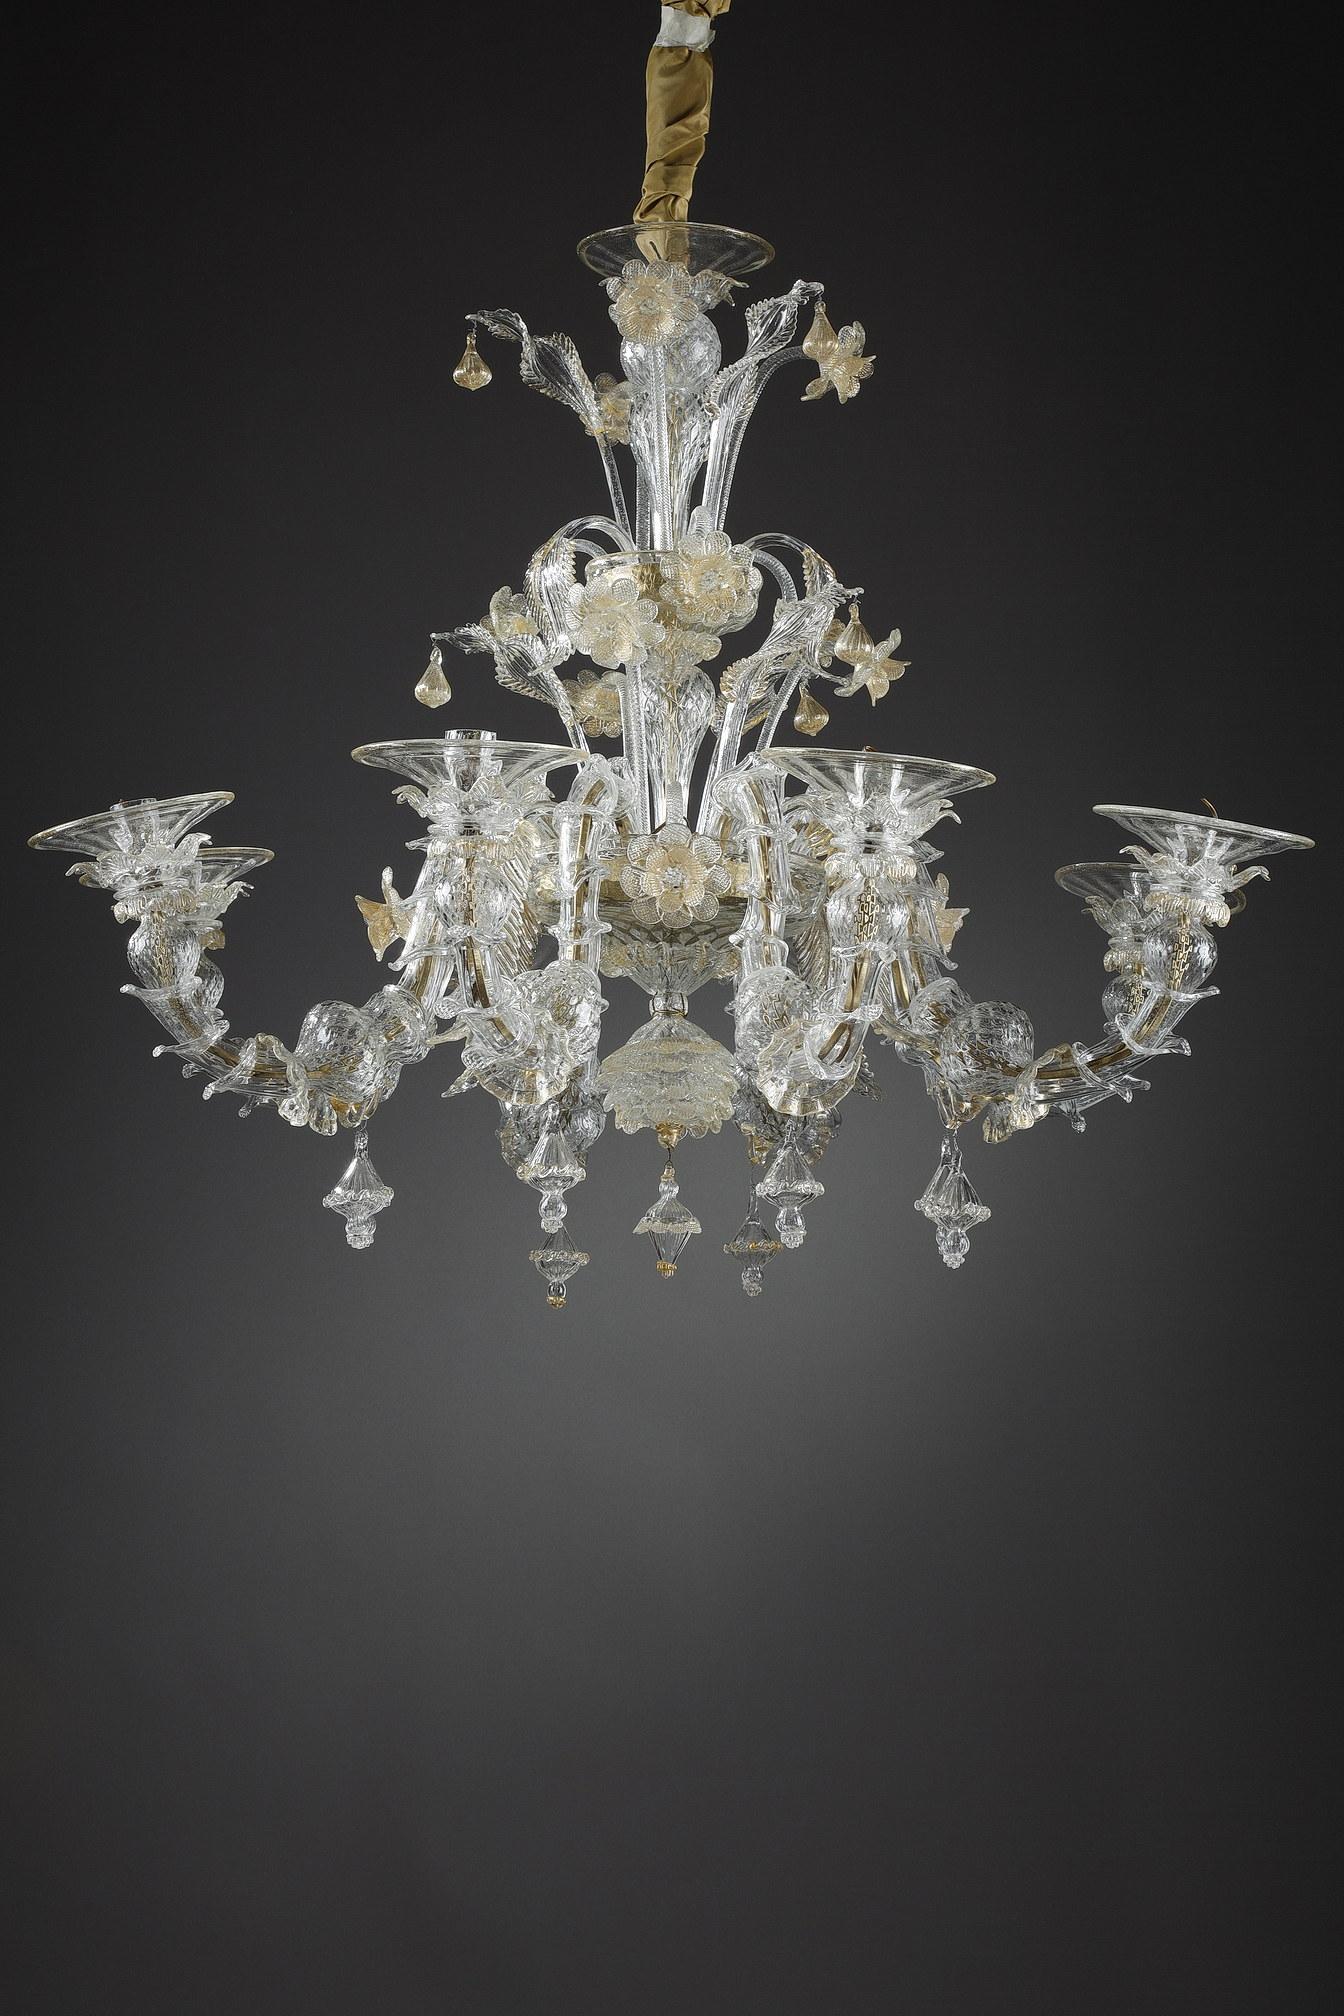 A large chandelier with eight arms of light made of translucent Murano spun glass inlaid with gold. The chandelier is decorated with flowers, foliage, rings and pendants of various shapes. The cup has flowers with individual petals in guilloche